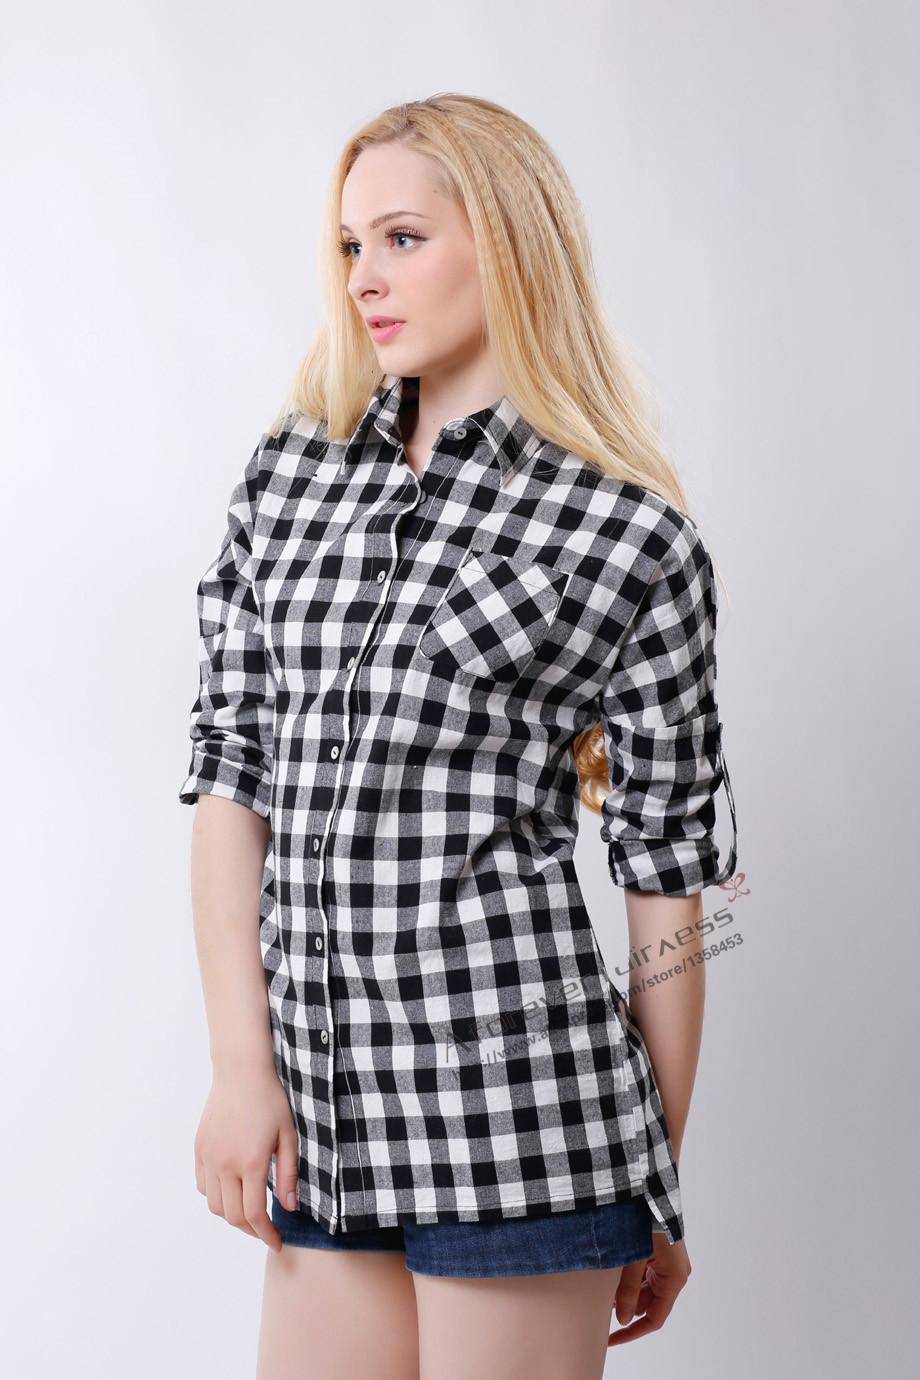 Women-Tops-Clothes-2016-Punk-Style-Long-Sleeve-Casual-Long-Black-White-Plaid-Shirts-Blouses-Loose-Pl-2044194179